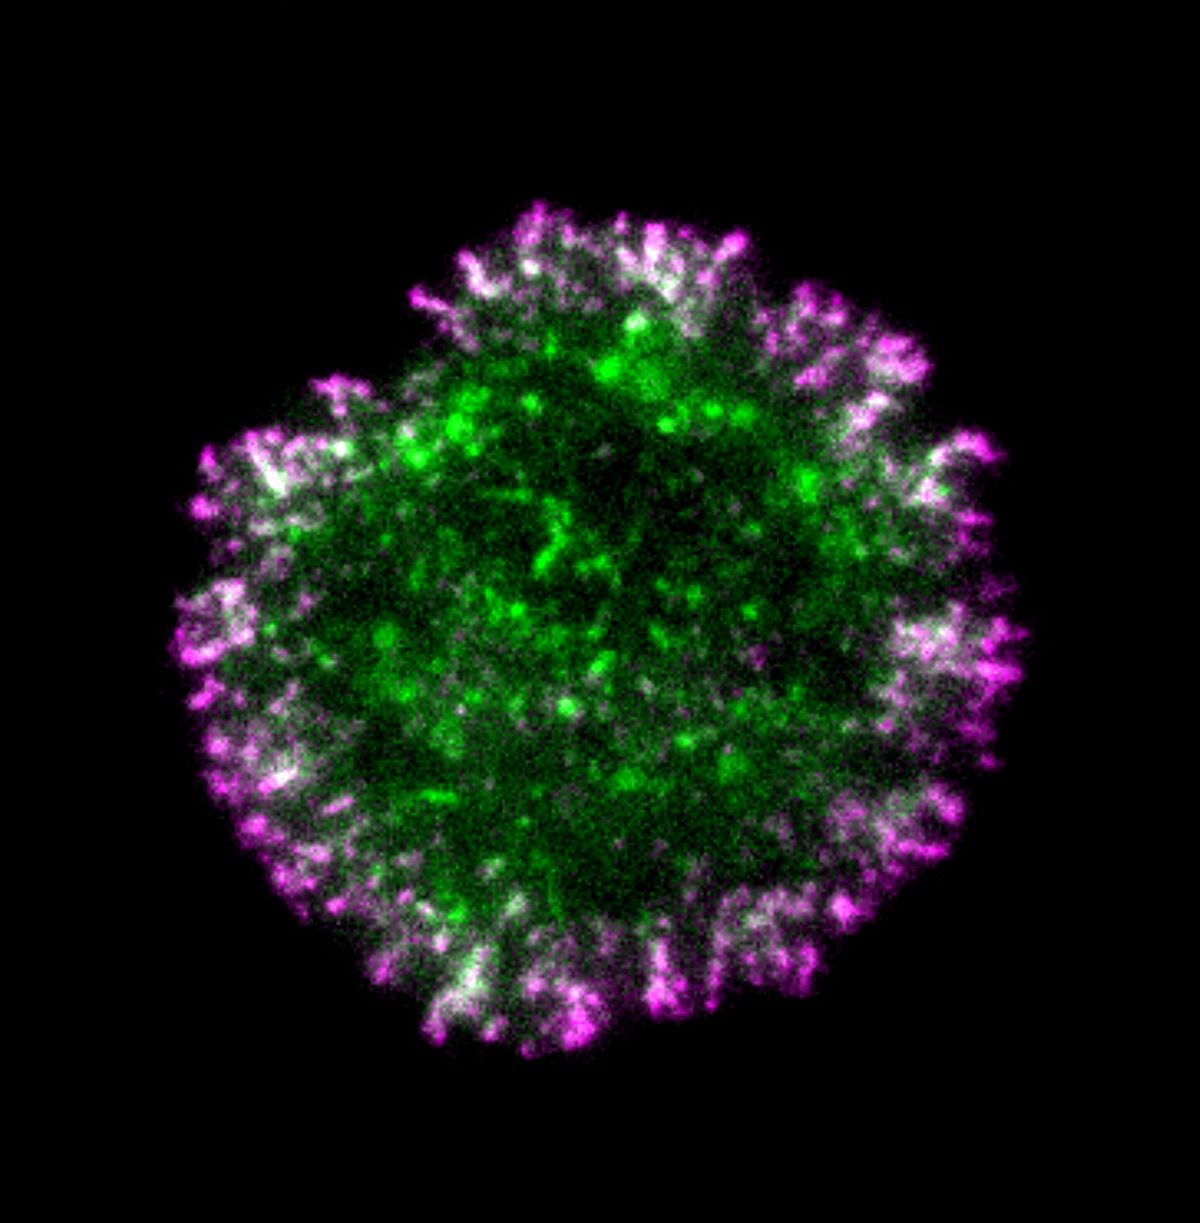 Fluorescent microscopy image of a single cell on a black background with magenta-labeled proteins clustered at the edge and green-labeled proteins scattered throughout the cell. Where the two meet is white.